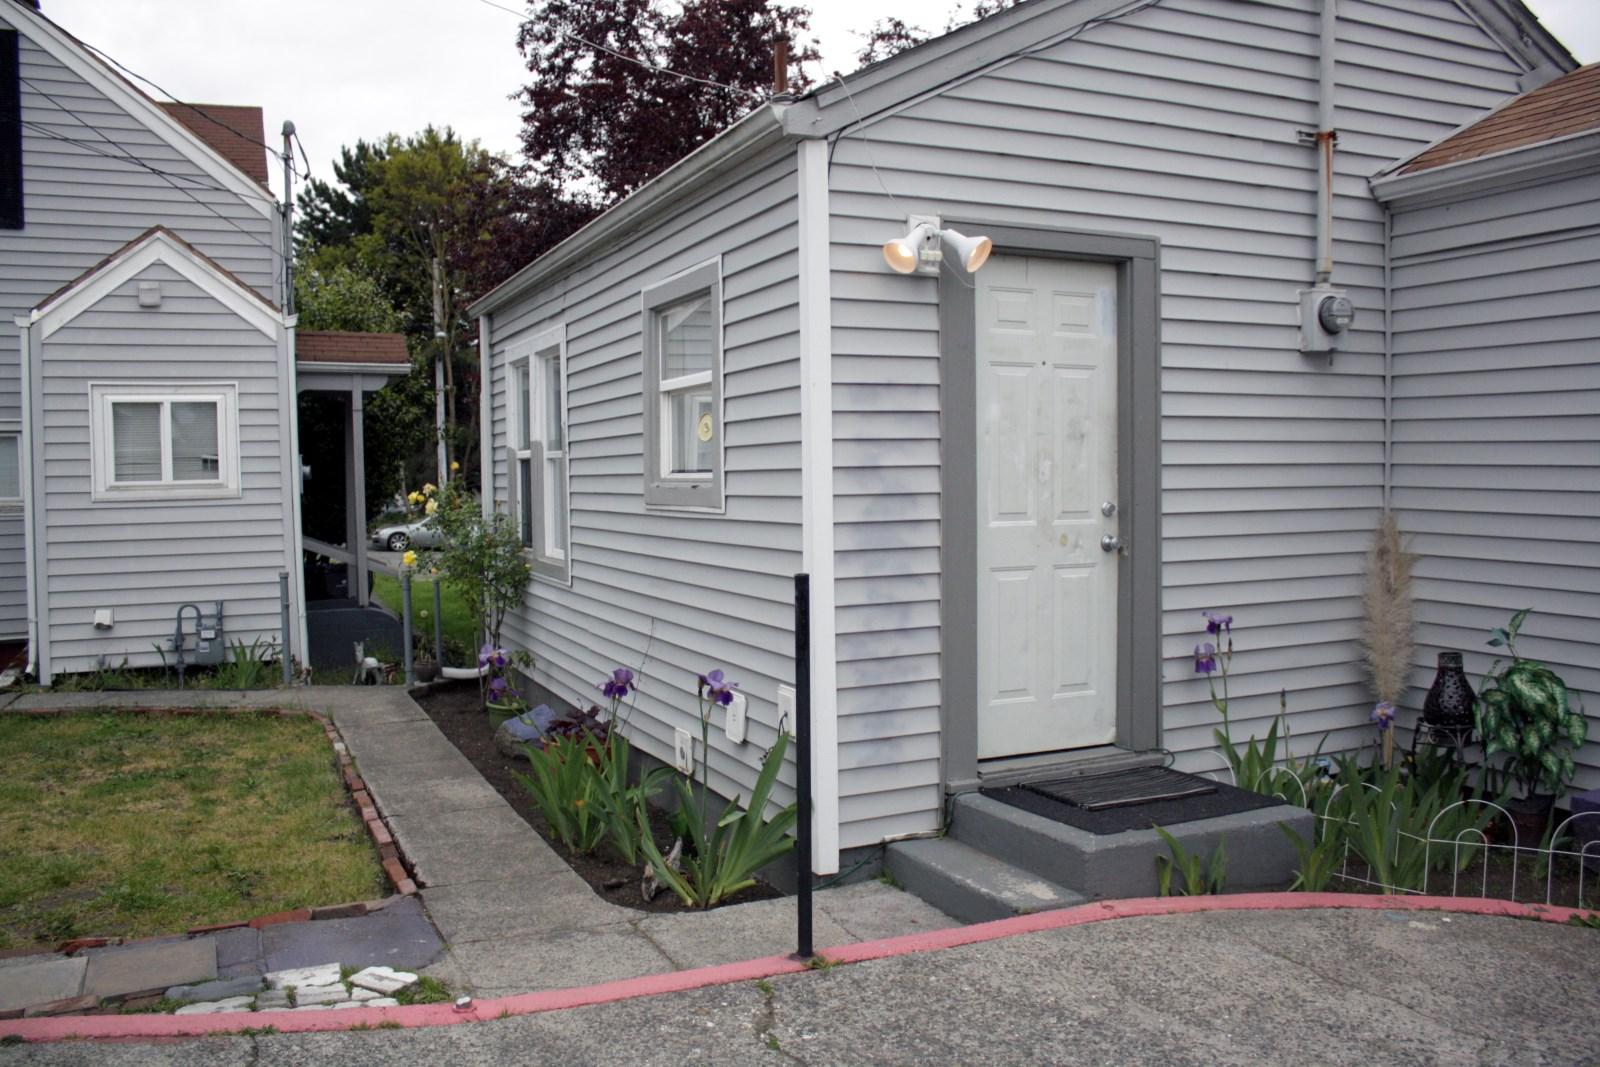 Why Itty Bitty Houses Line Bremerton Alleys KUOW News And